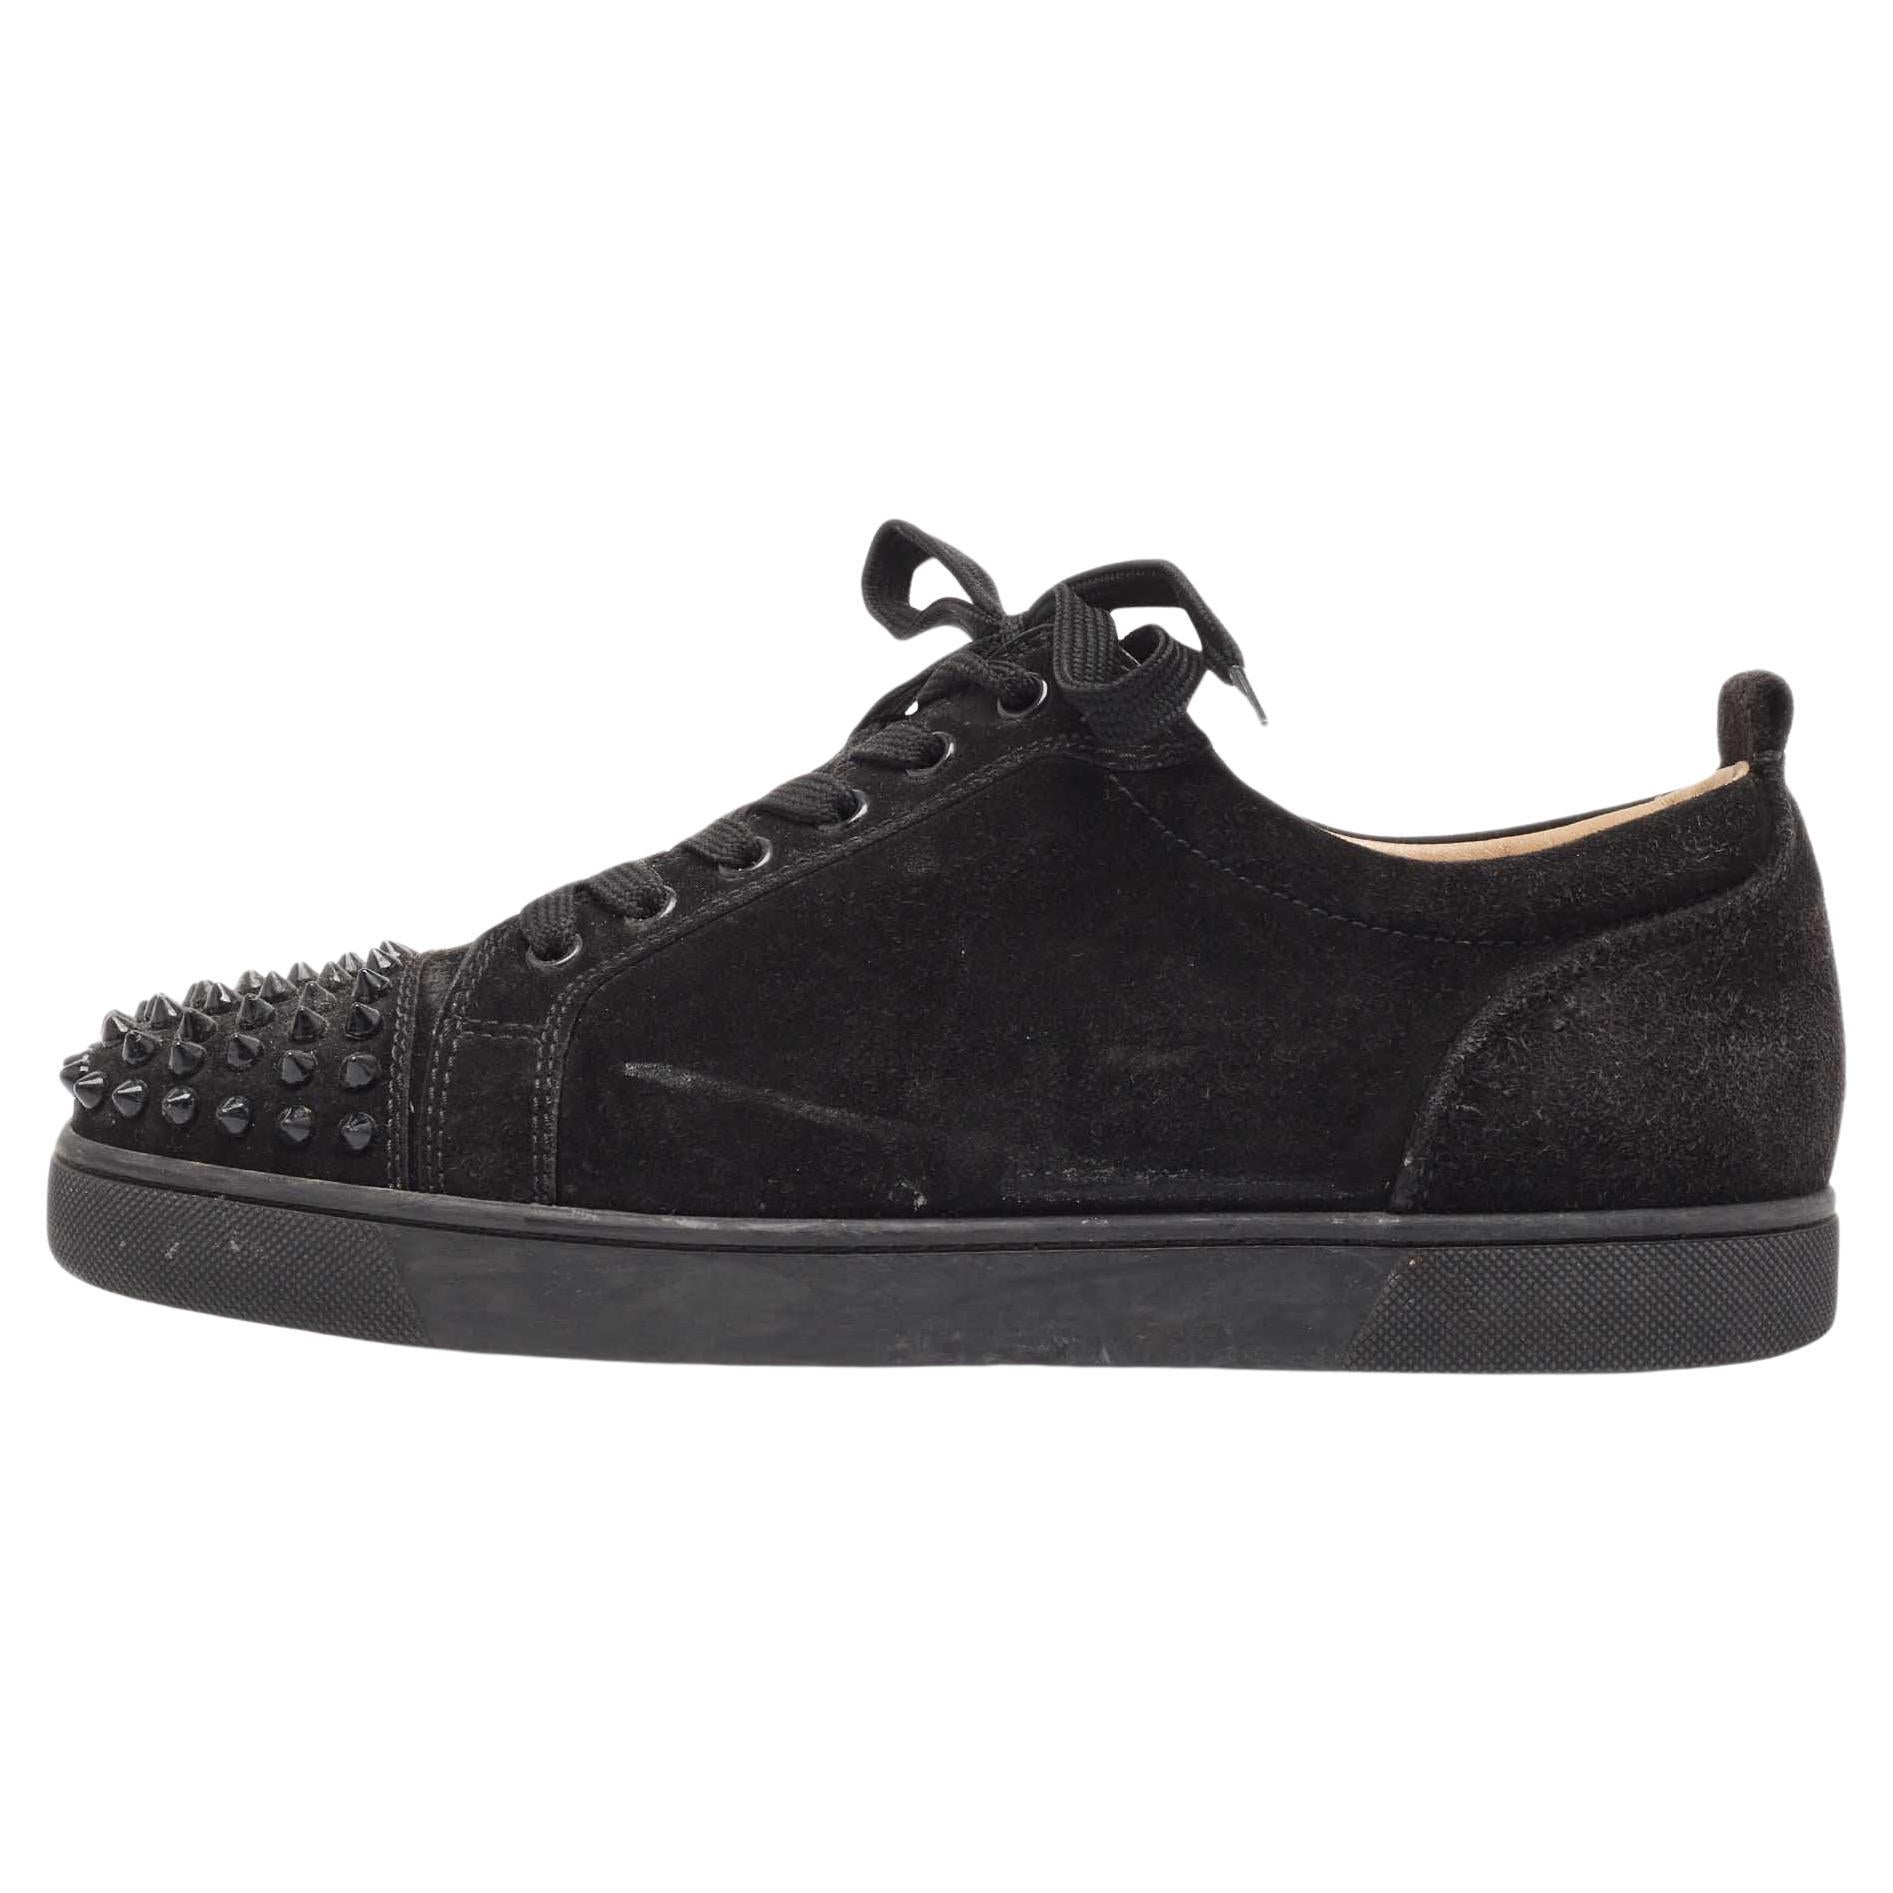 Christian Louboutin Black Suede Louise Spike Low Top Sneakers Size 43 For Sale